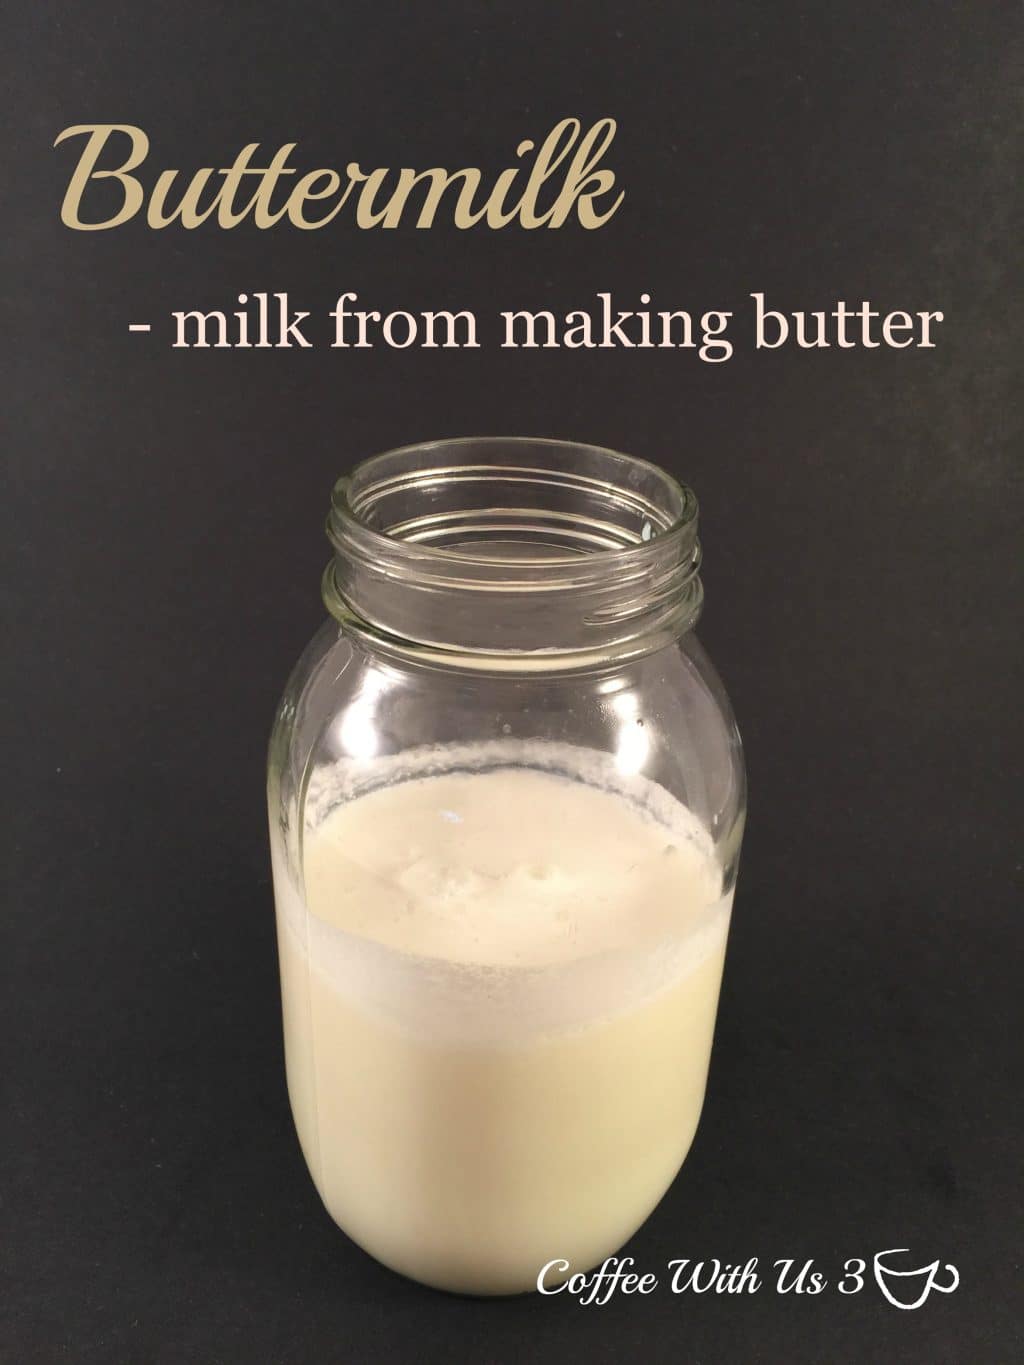 The liquid drained of while making butter is called buttermilk, but it is n...